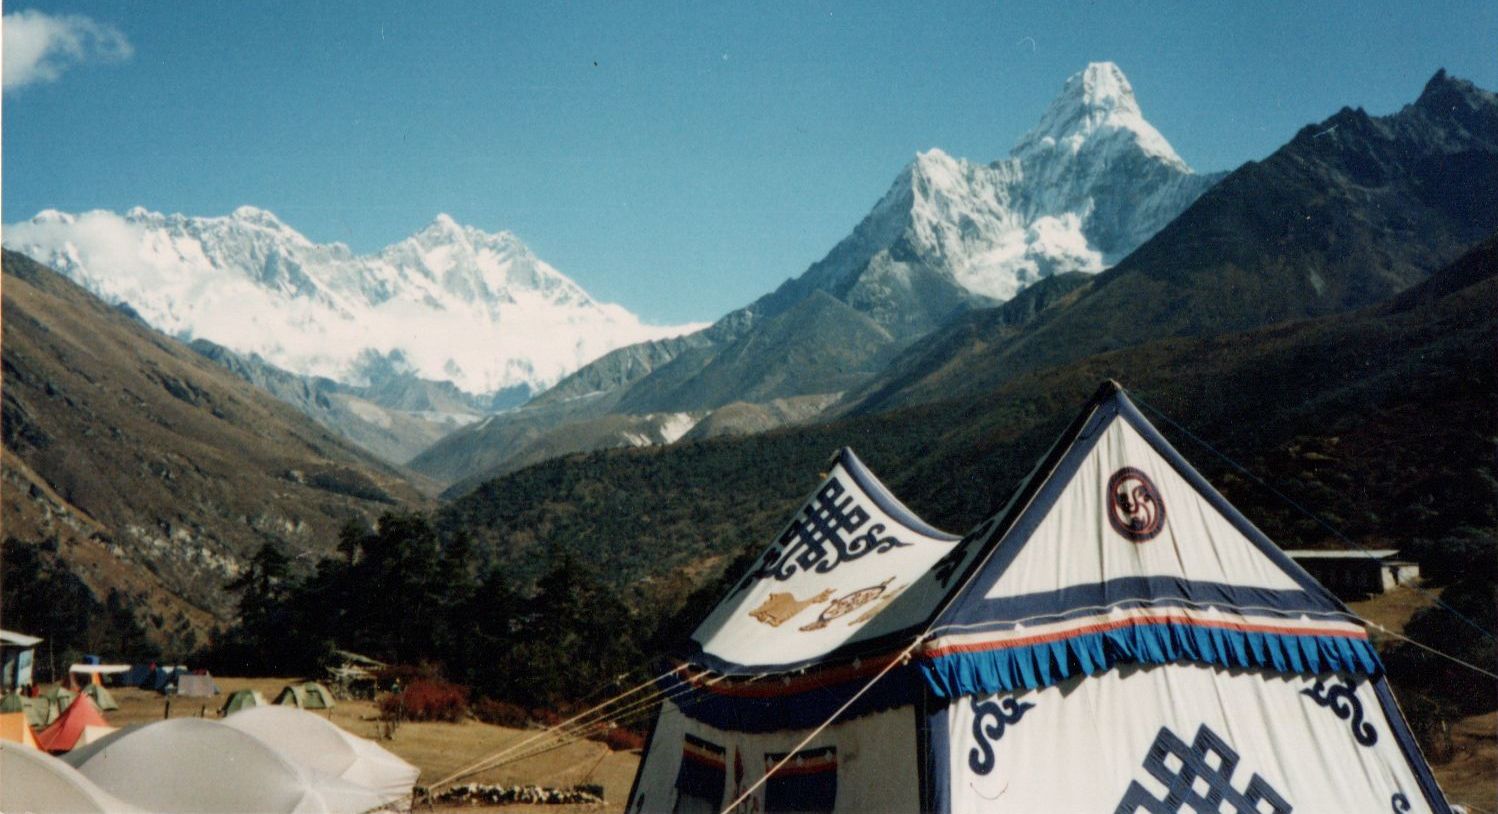 View from Thyangboche of Everest, Nuptse-Lhotse Wall and Ama Dablam